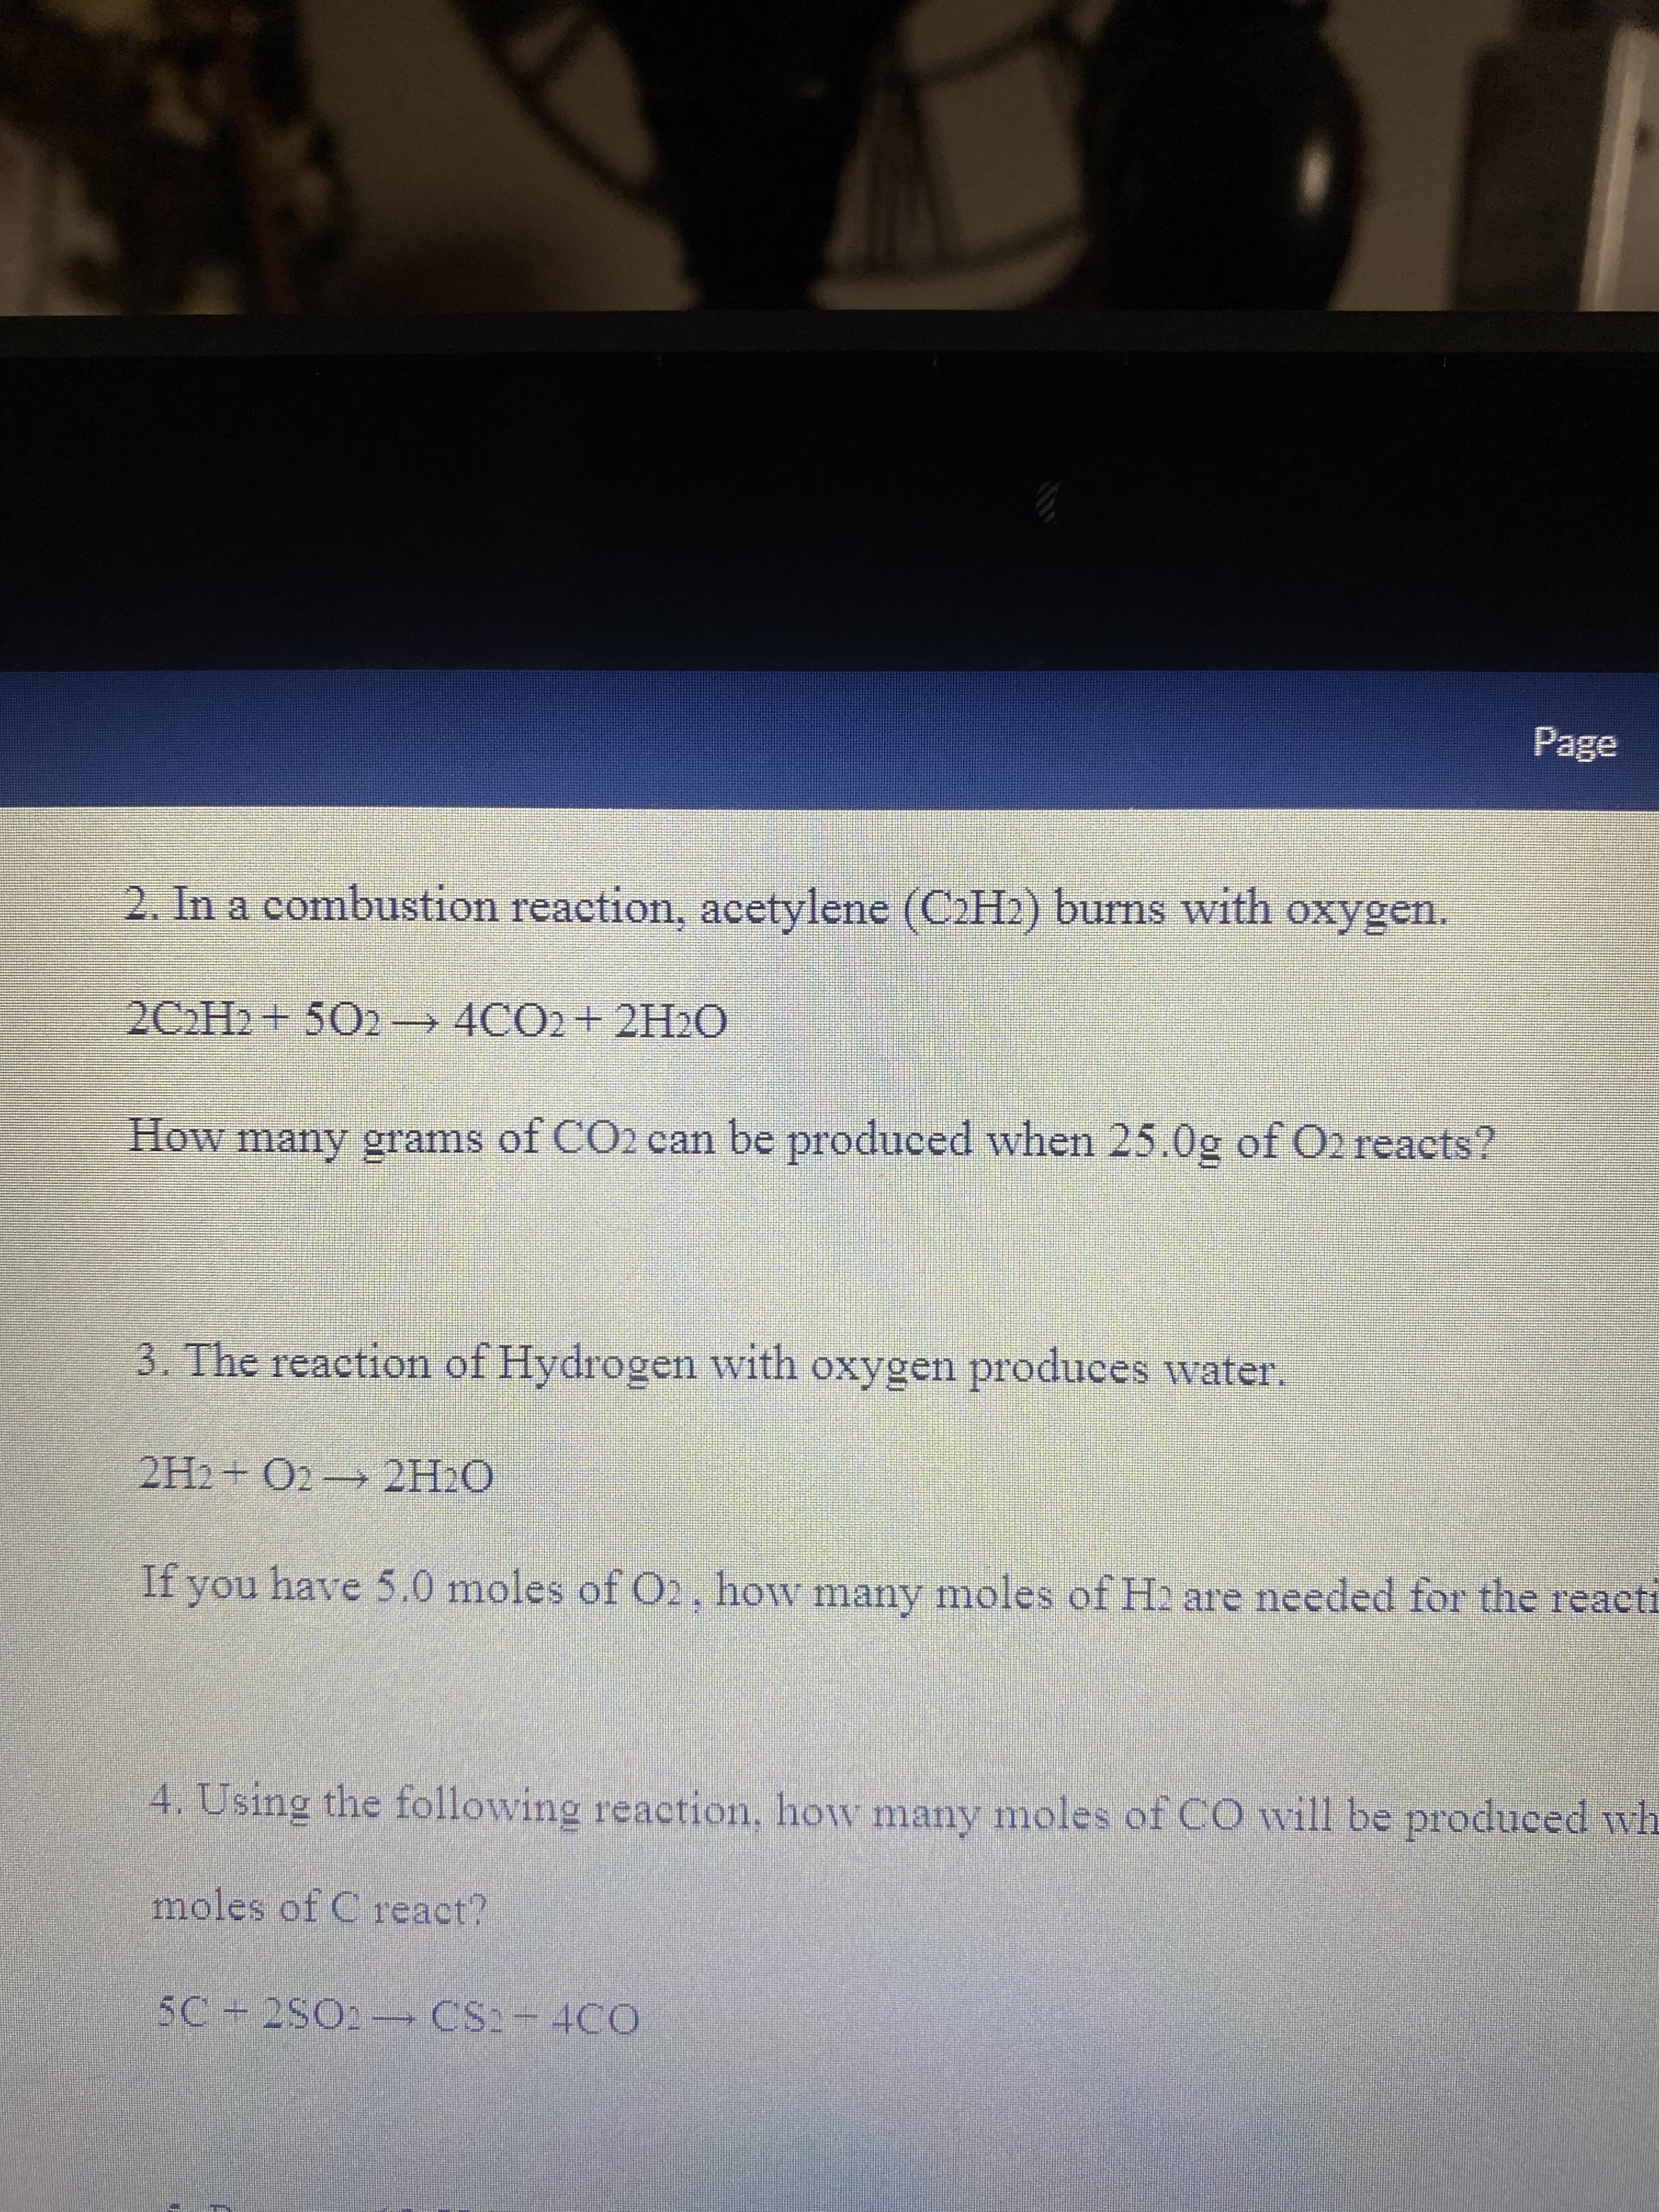 Page
2. In a combustion reaction, acetylene (C2H2) burns with oxygen.
2CH2+ 502 4CO2+ 2H2O
How many grams of CO2 can be produced when 25.0g of O2 reacts?
3. The reaction of Hydrogen with oxygen produces water,
2H2+ O2 2H2O
If you have 5.0 moles of O2. how many moles of H2 are needed for the reacti
4. Using the following reaction, how many moles of CO will be produced wh
moles of C react?
SC+2SO2-CS2-4CO
